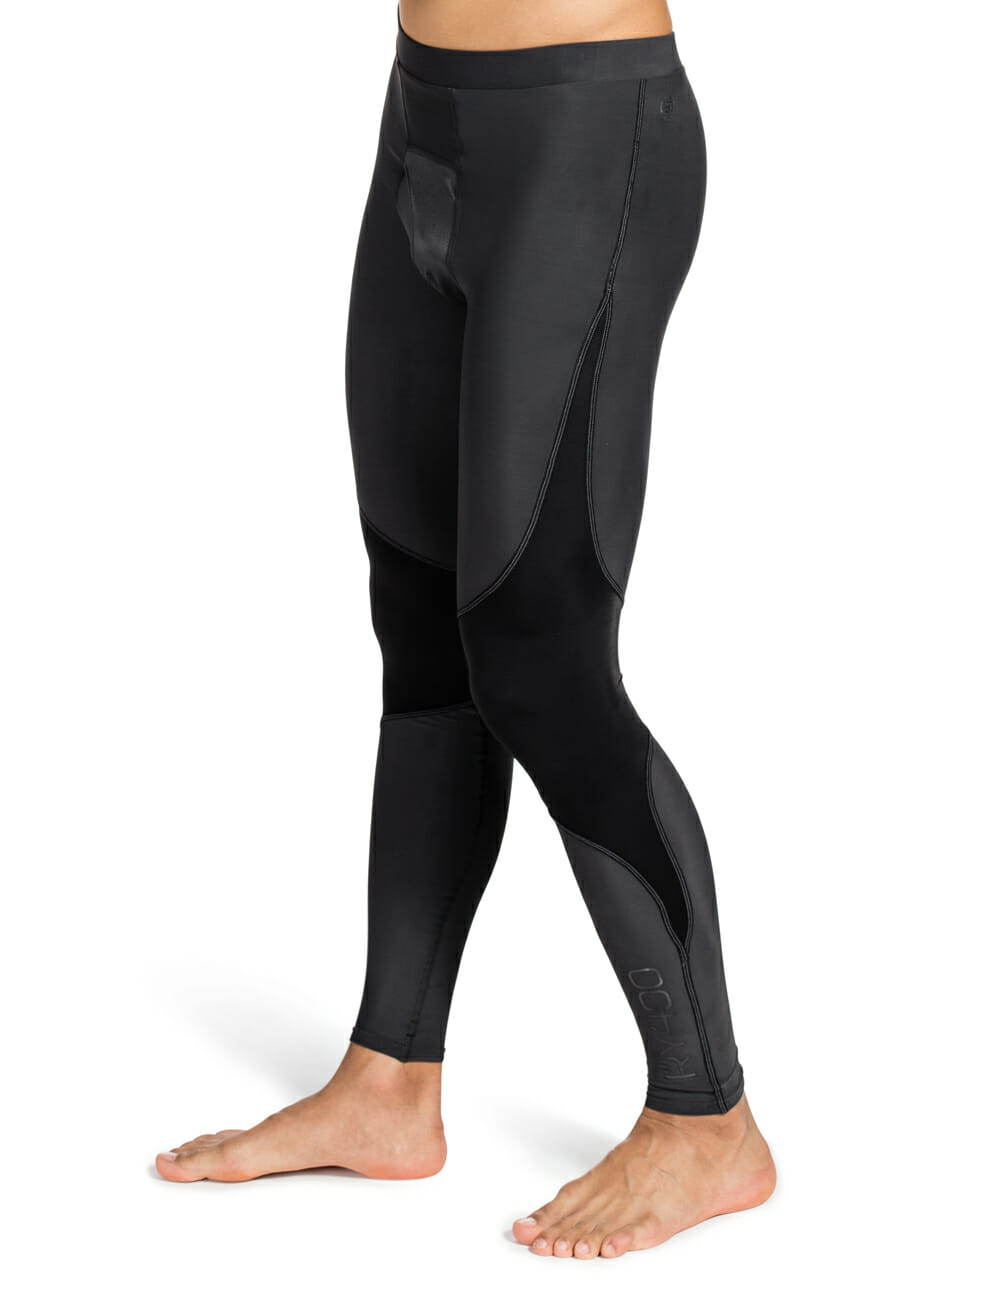 Skins RY400 Women's Compression Long Tights - Graphite